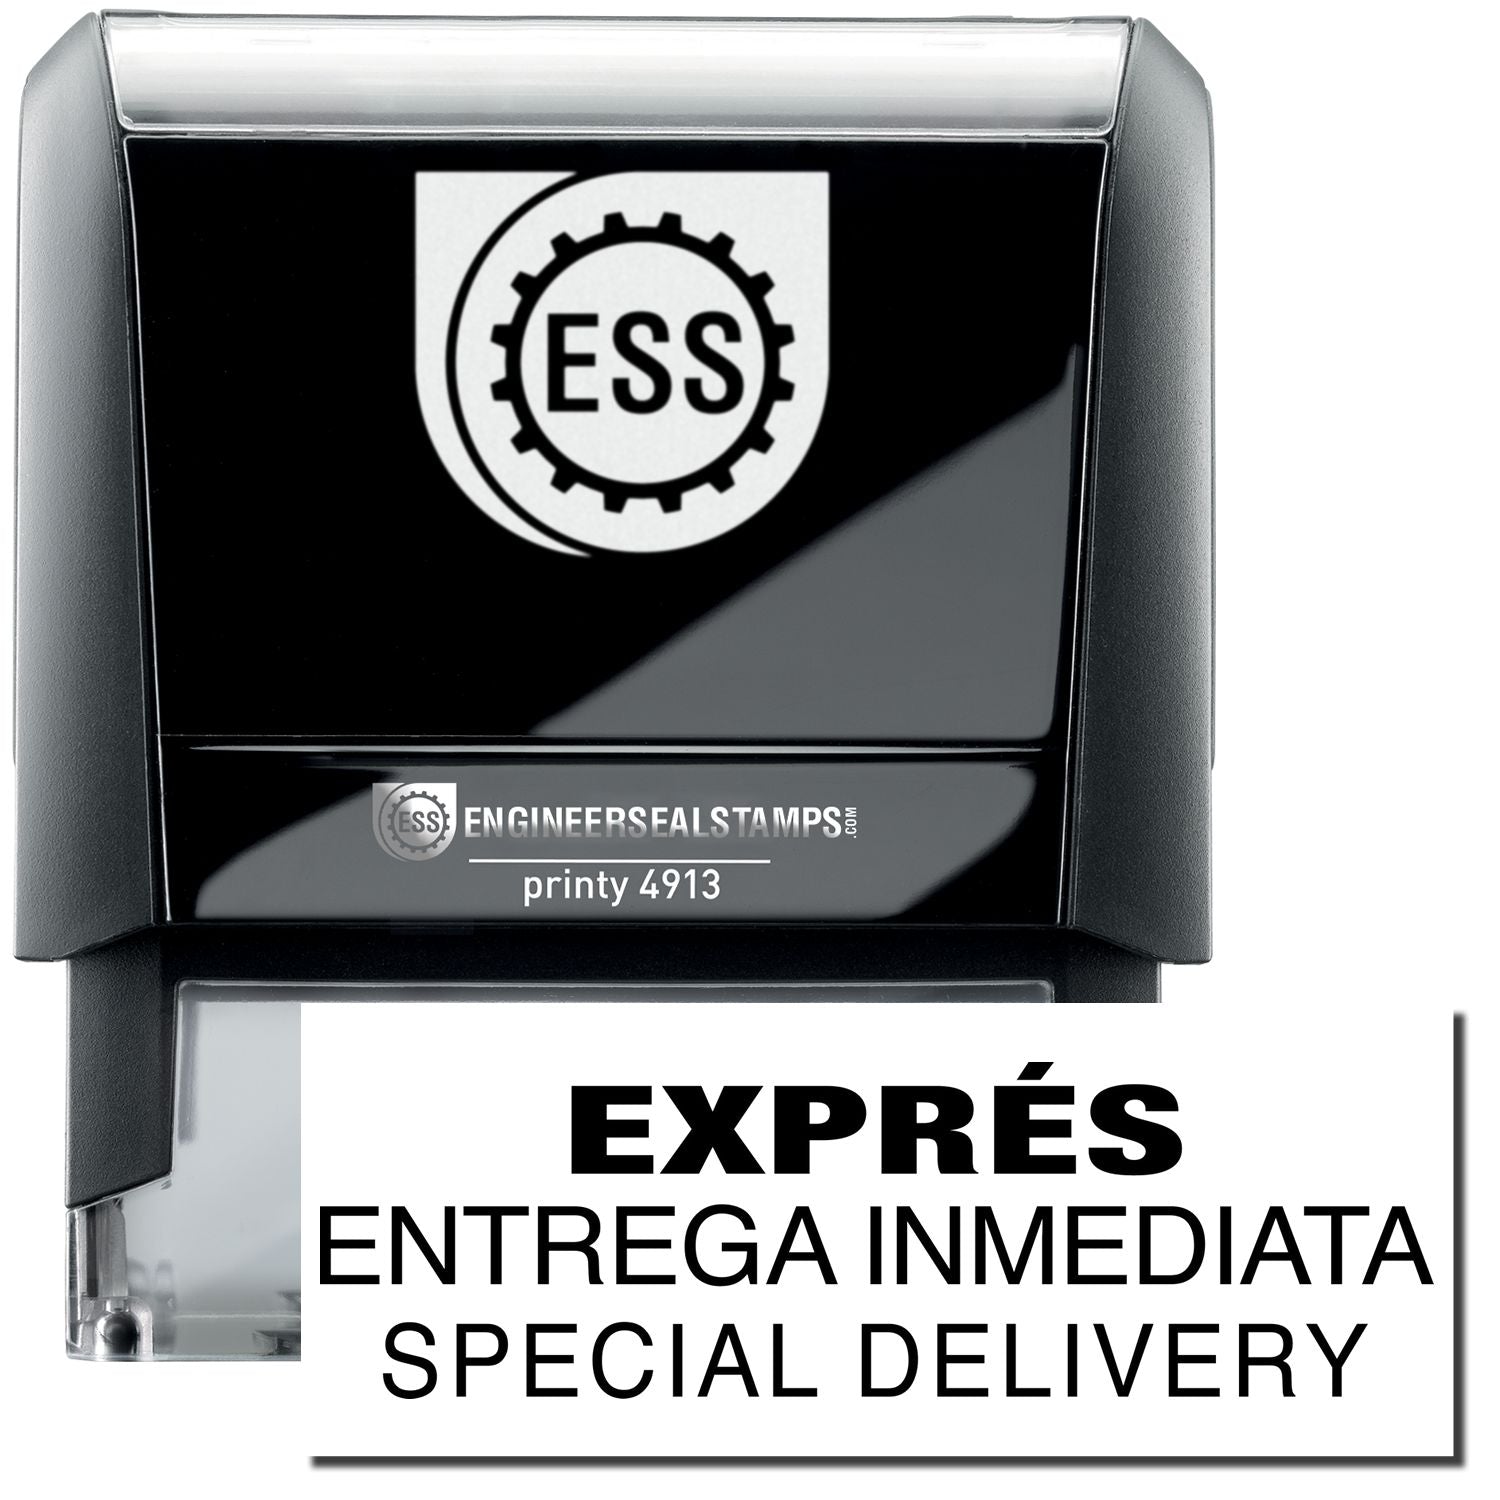 A self-inking stamp with a stamped image showing how the text "EXPRES ENTREGA INMEDIATA SPECIAL DELIVERY" in a large font is displayed by it after stamping.